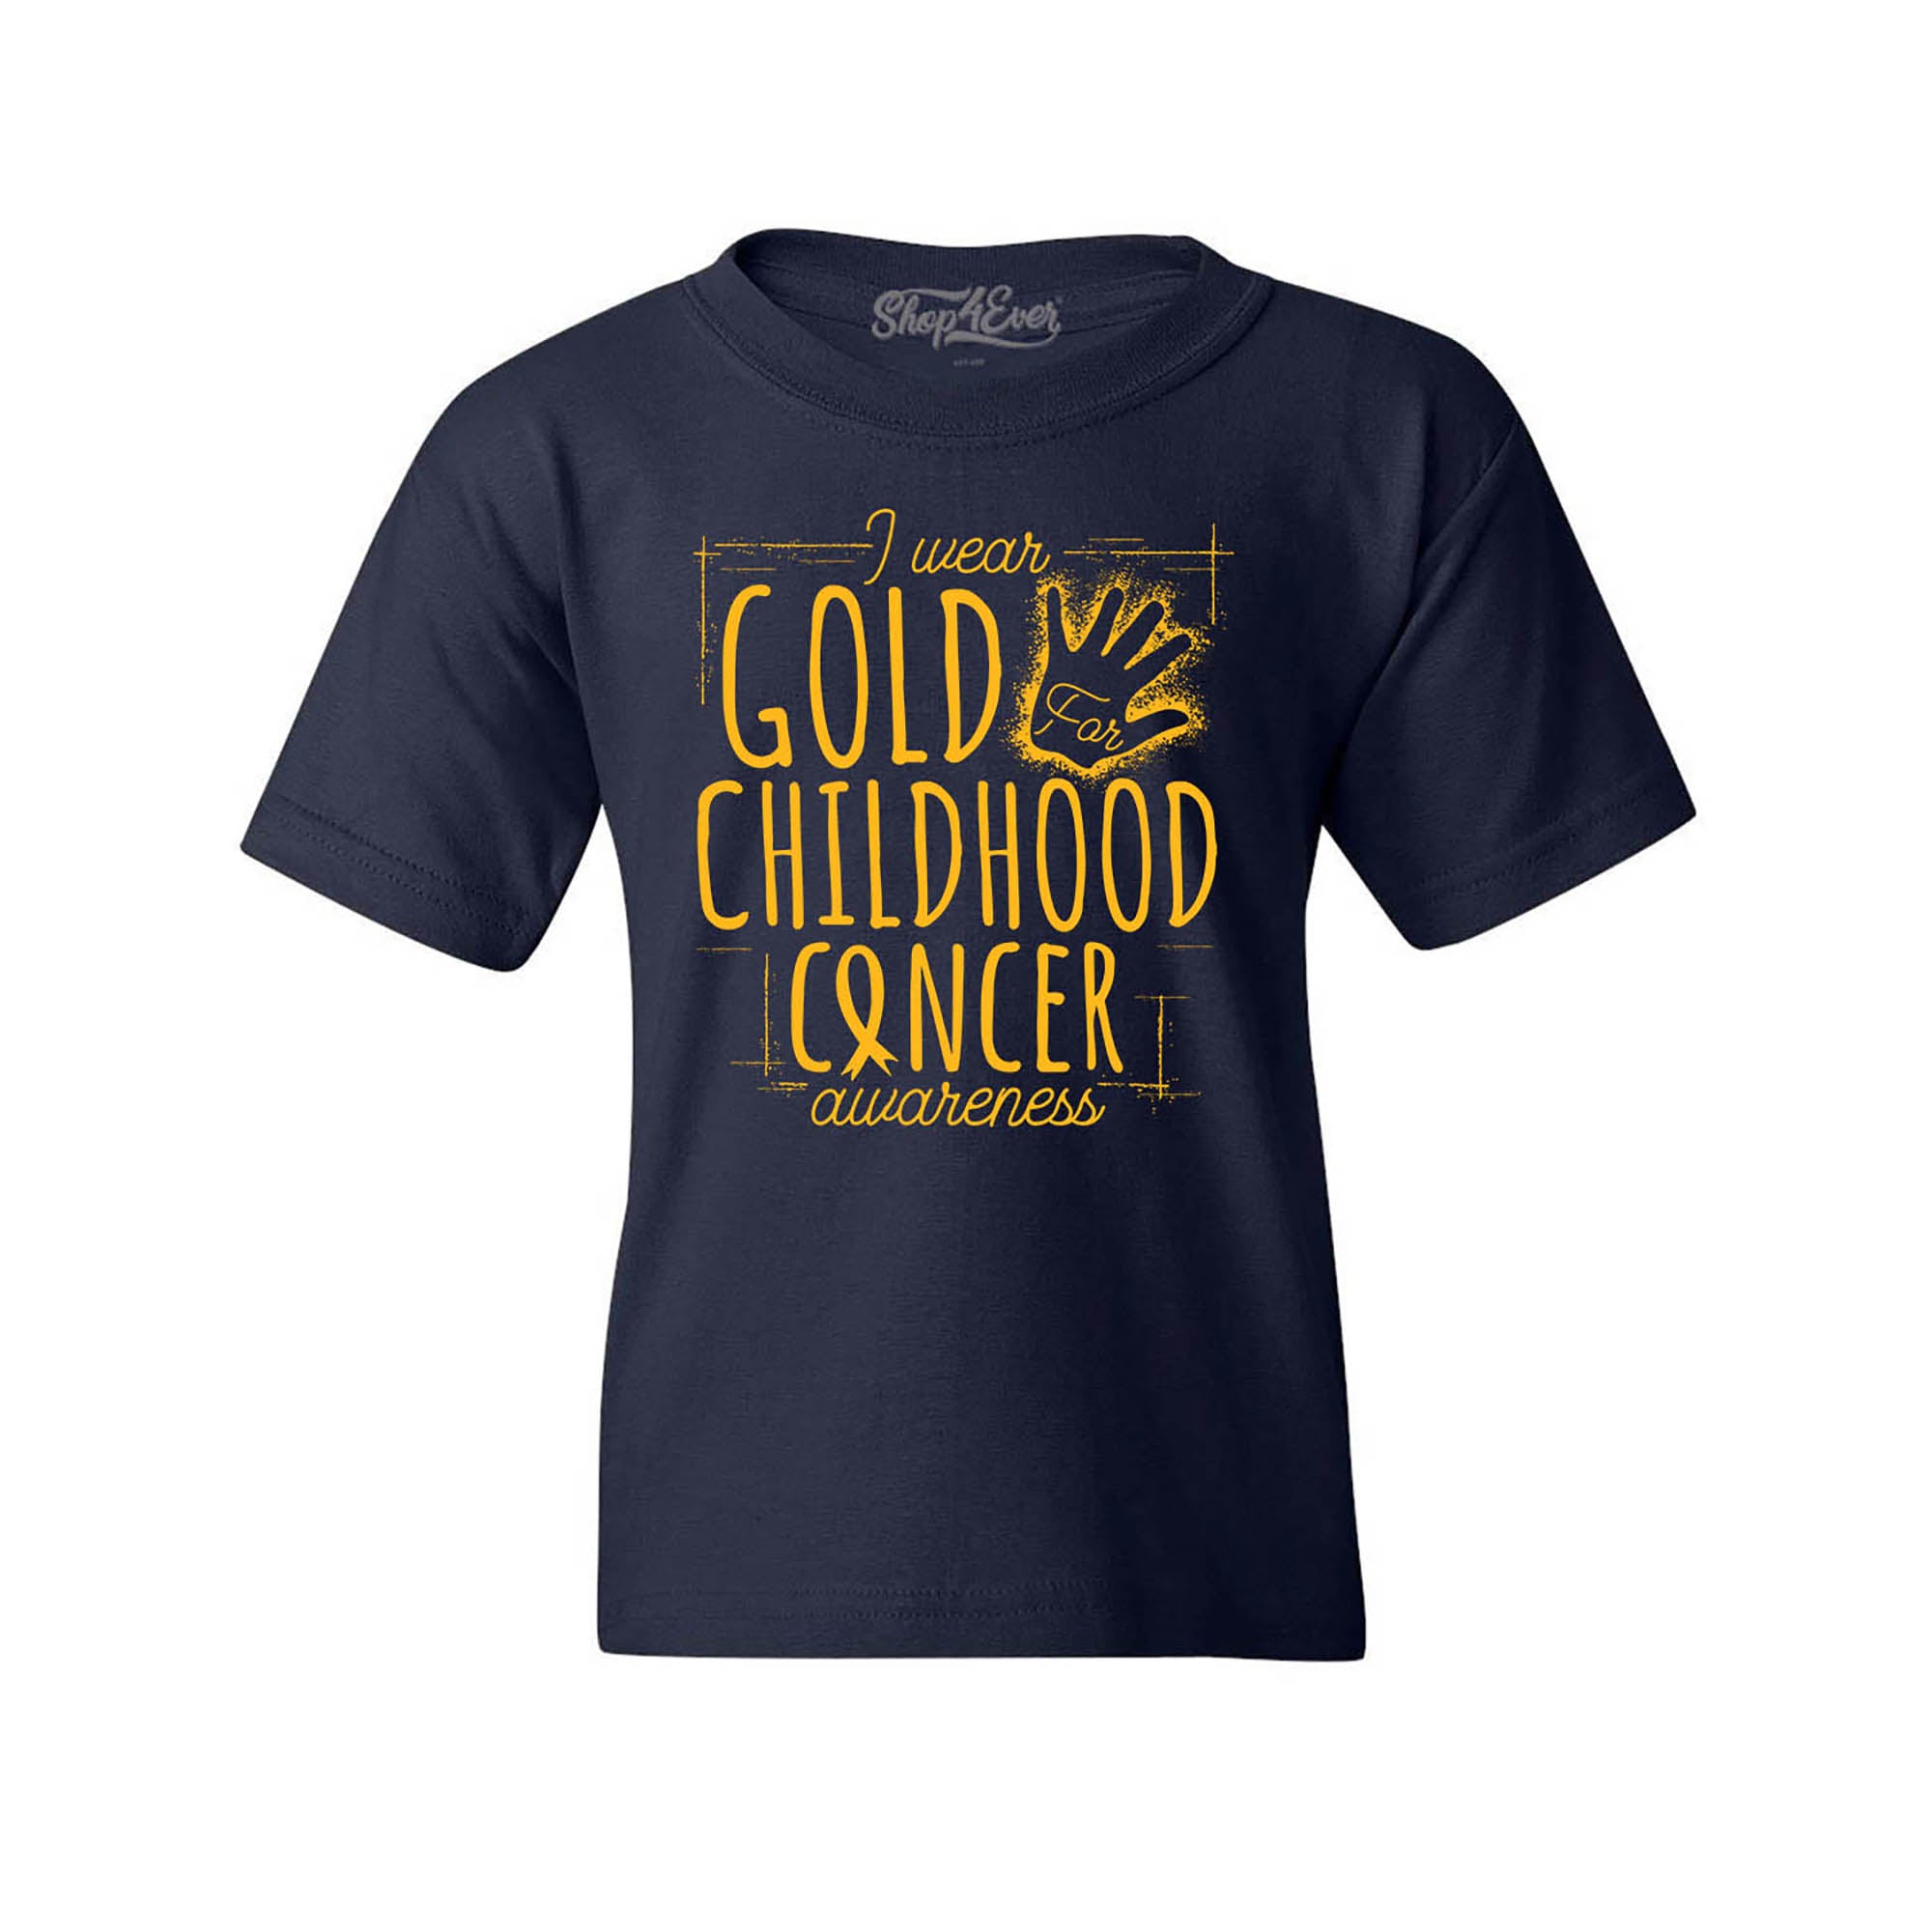 I Wear Gold for Childhood Cancer Awareness Kids Child Youth's T-Shirt